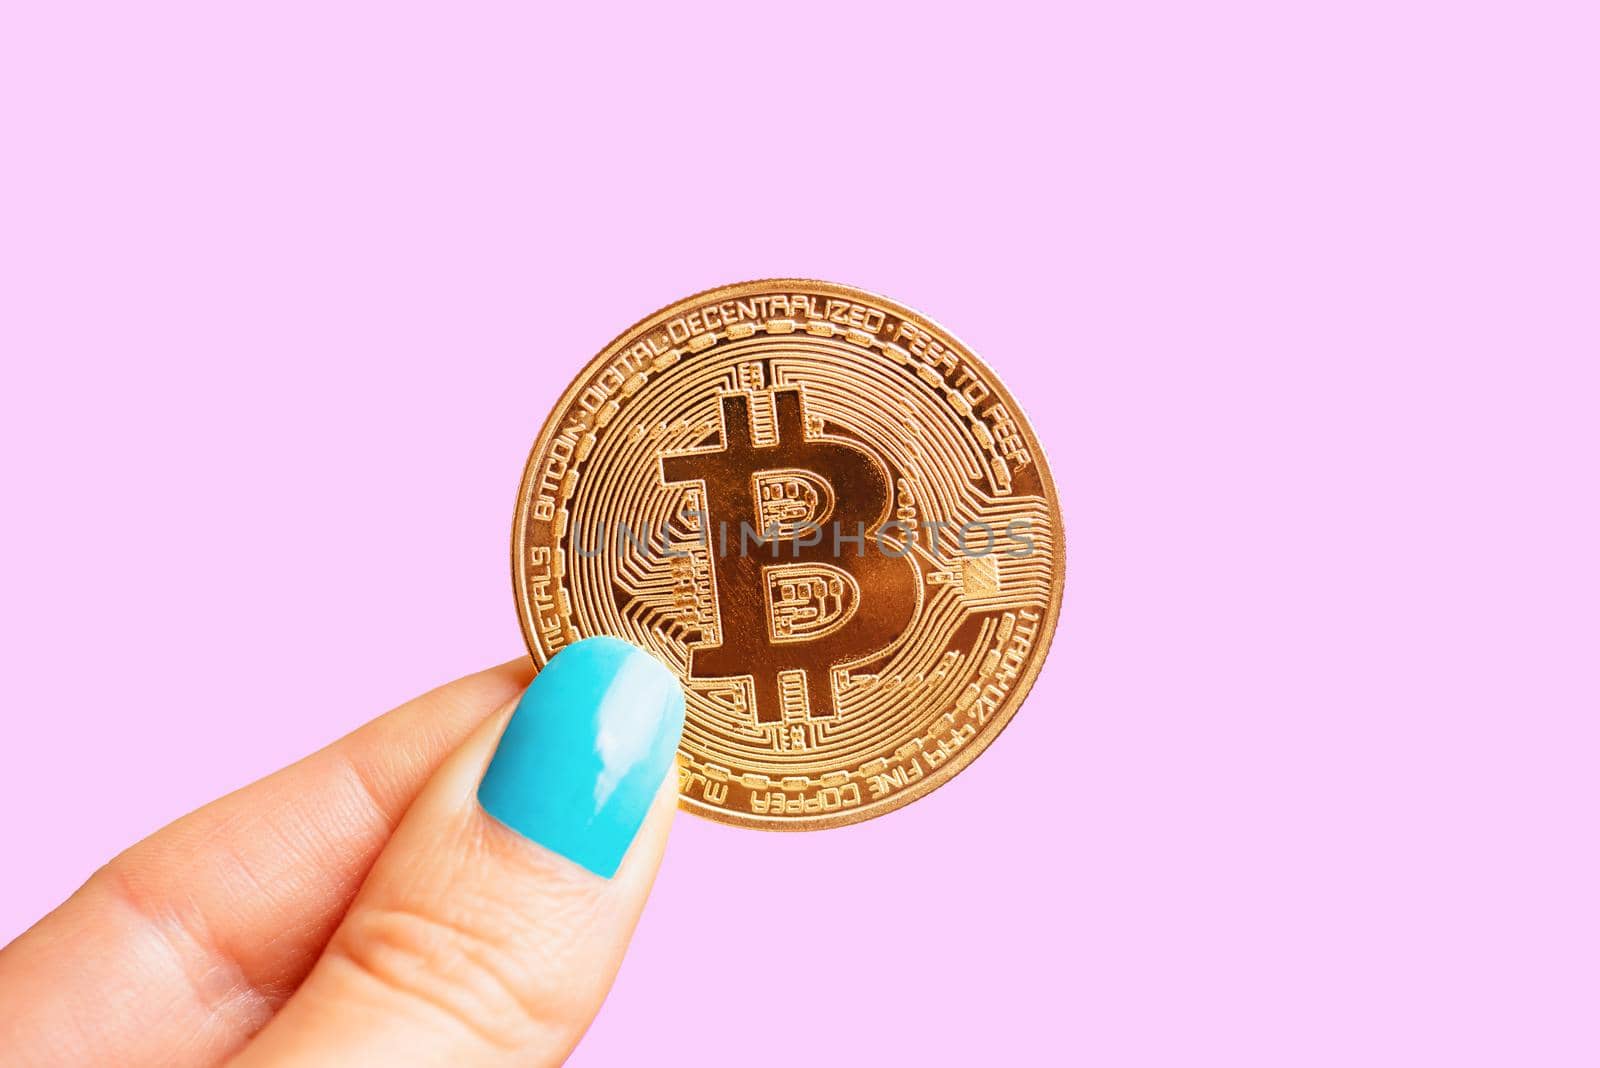 Female hand holding gold coin bitcoin on a pink background, symbol of crypto currency.